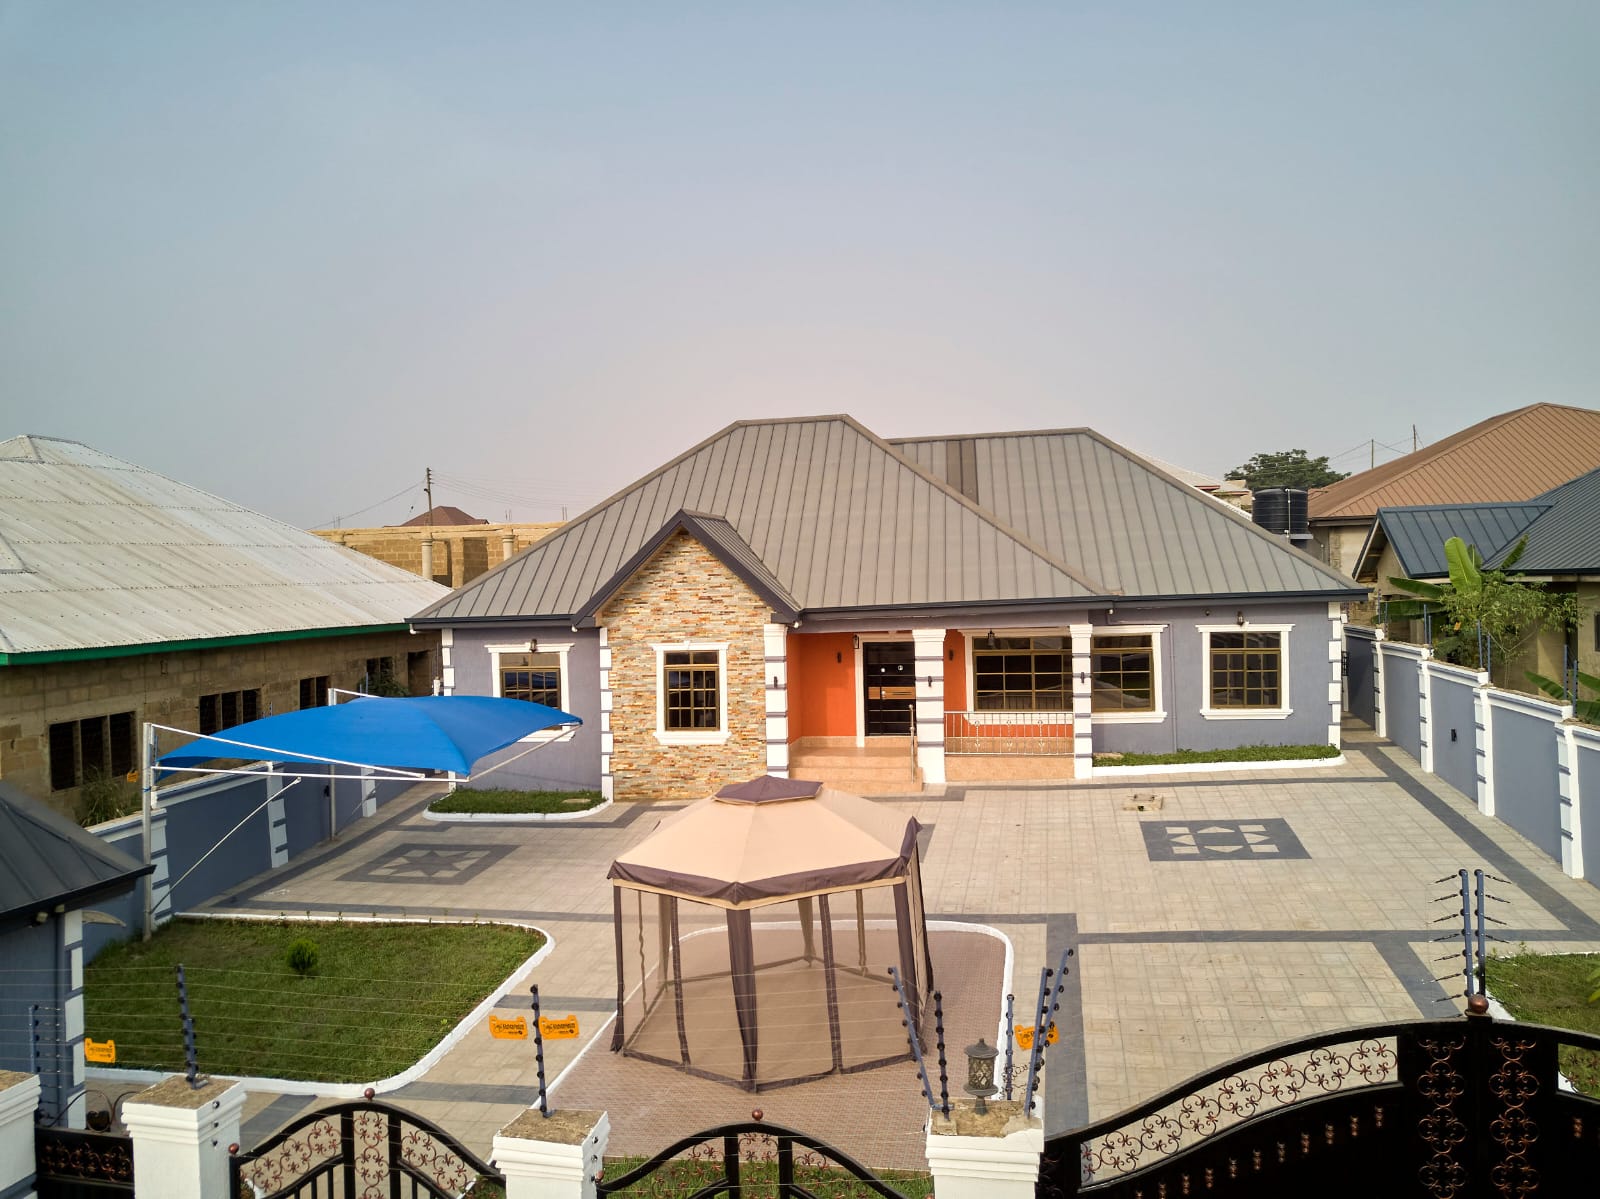 Executive Newly Built 4bedrooms House With Boys Quaters In Kumasi For Sale